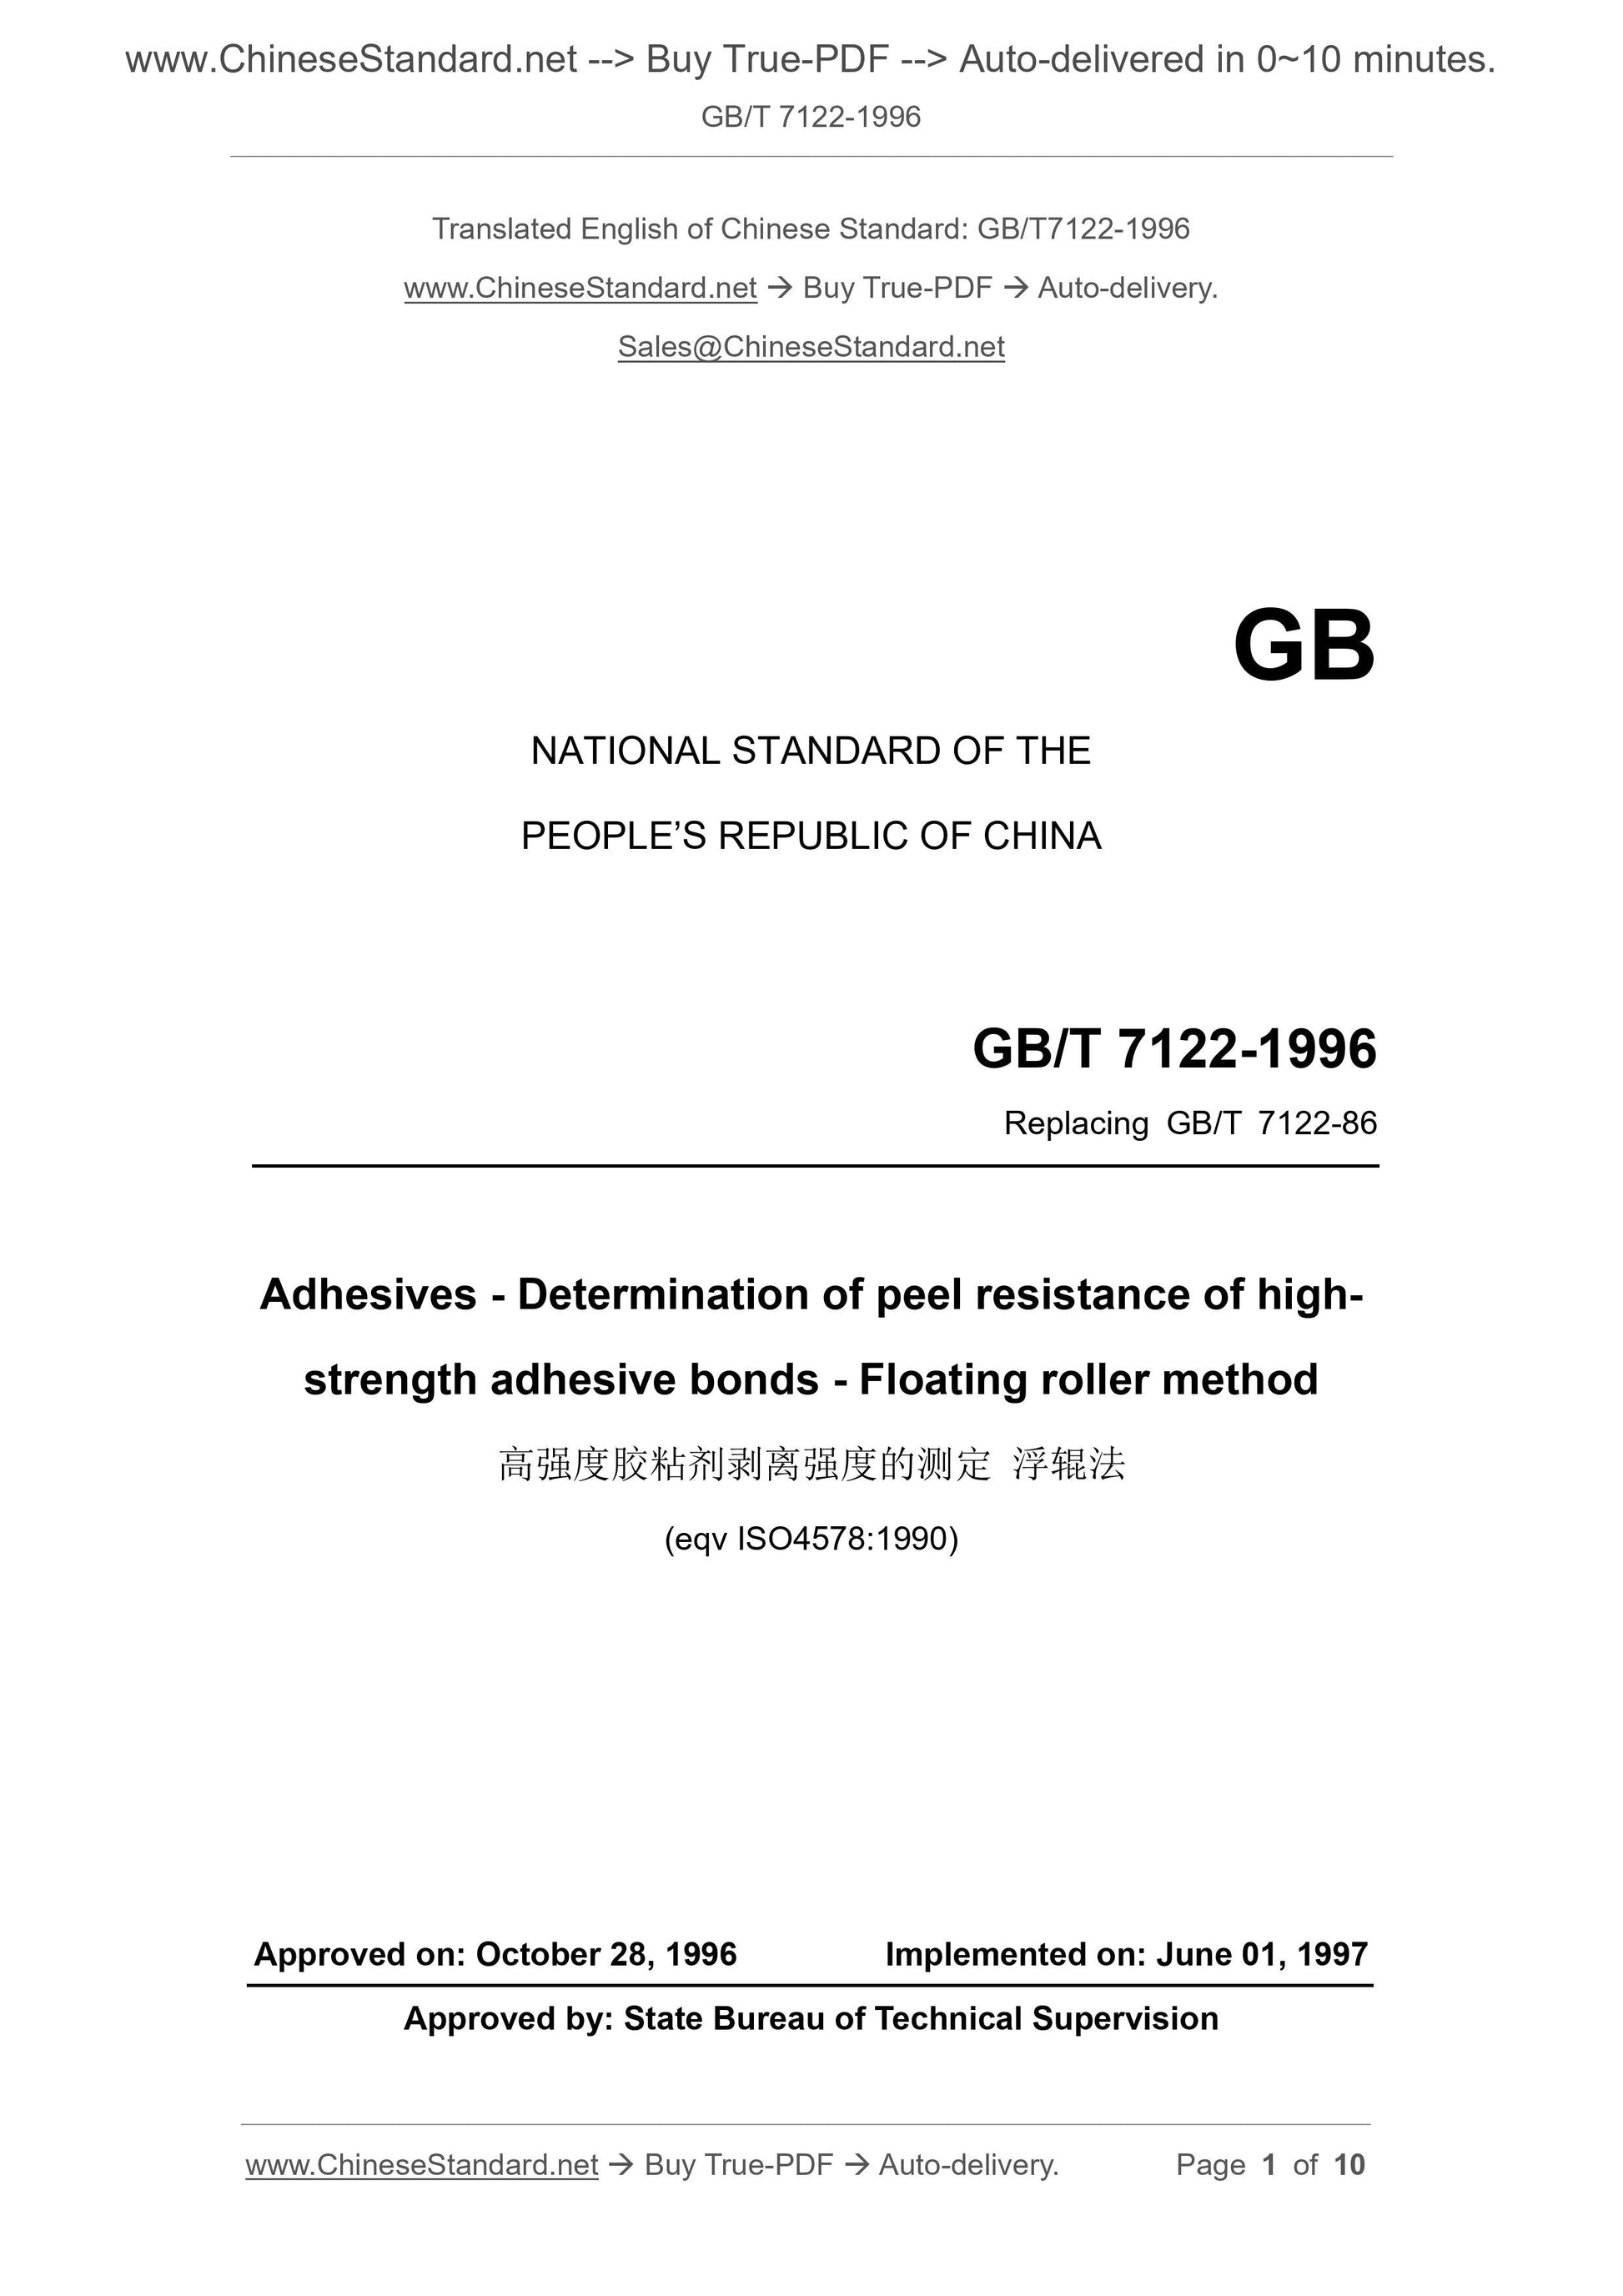 GB/T 7122-1996 Page 1